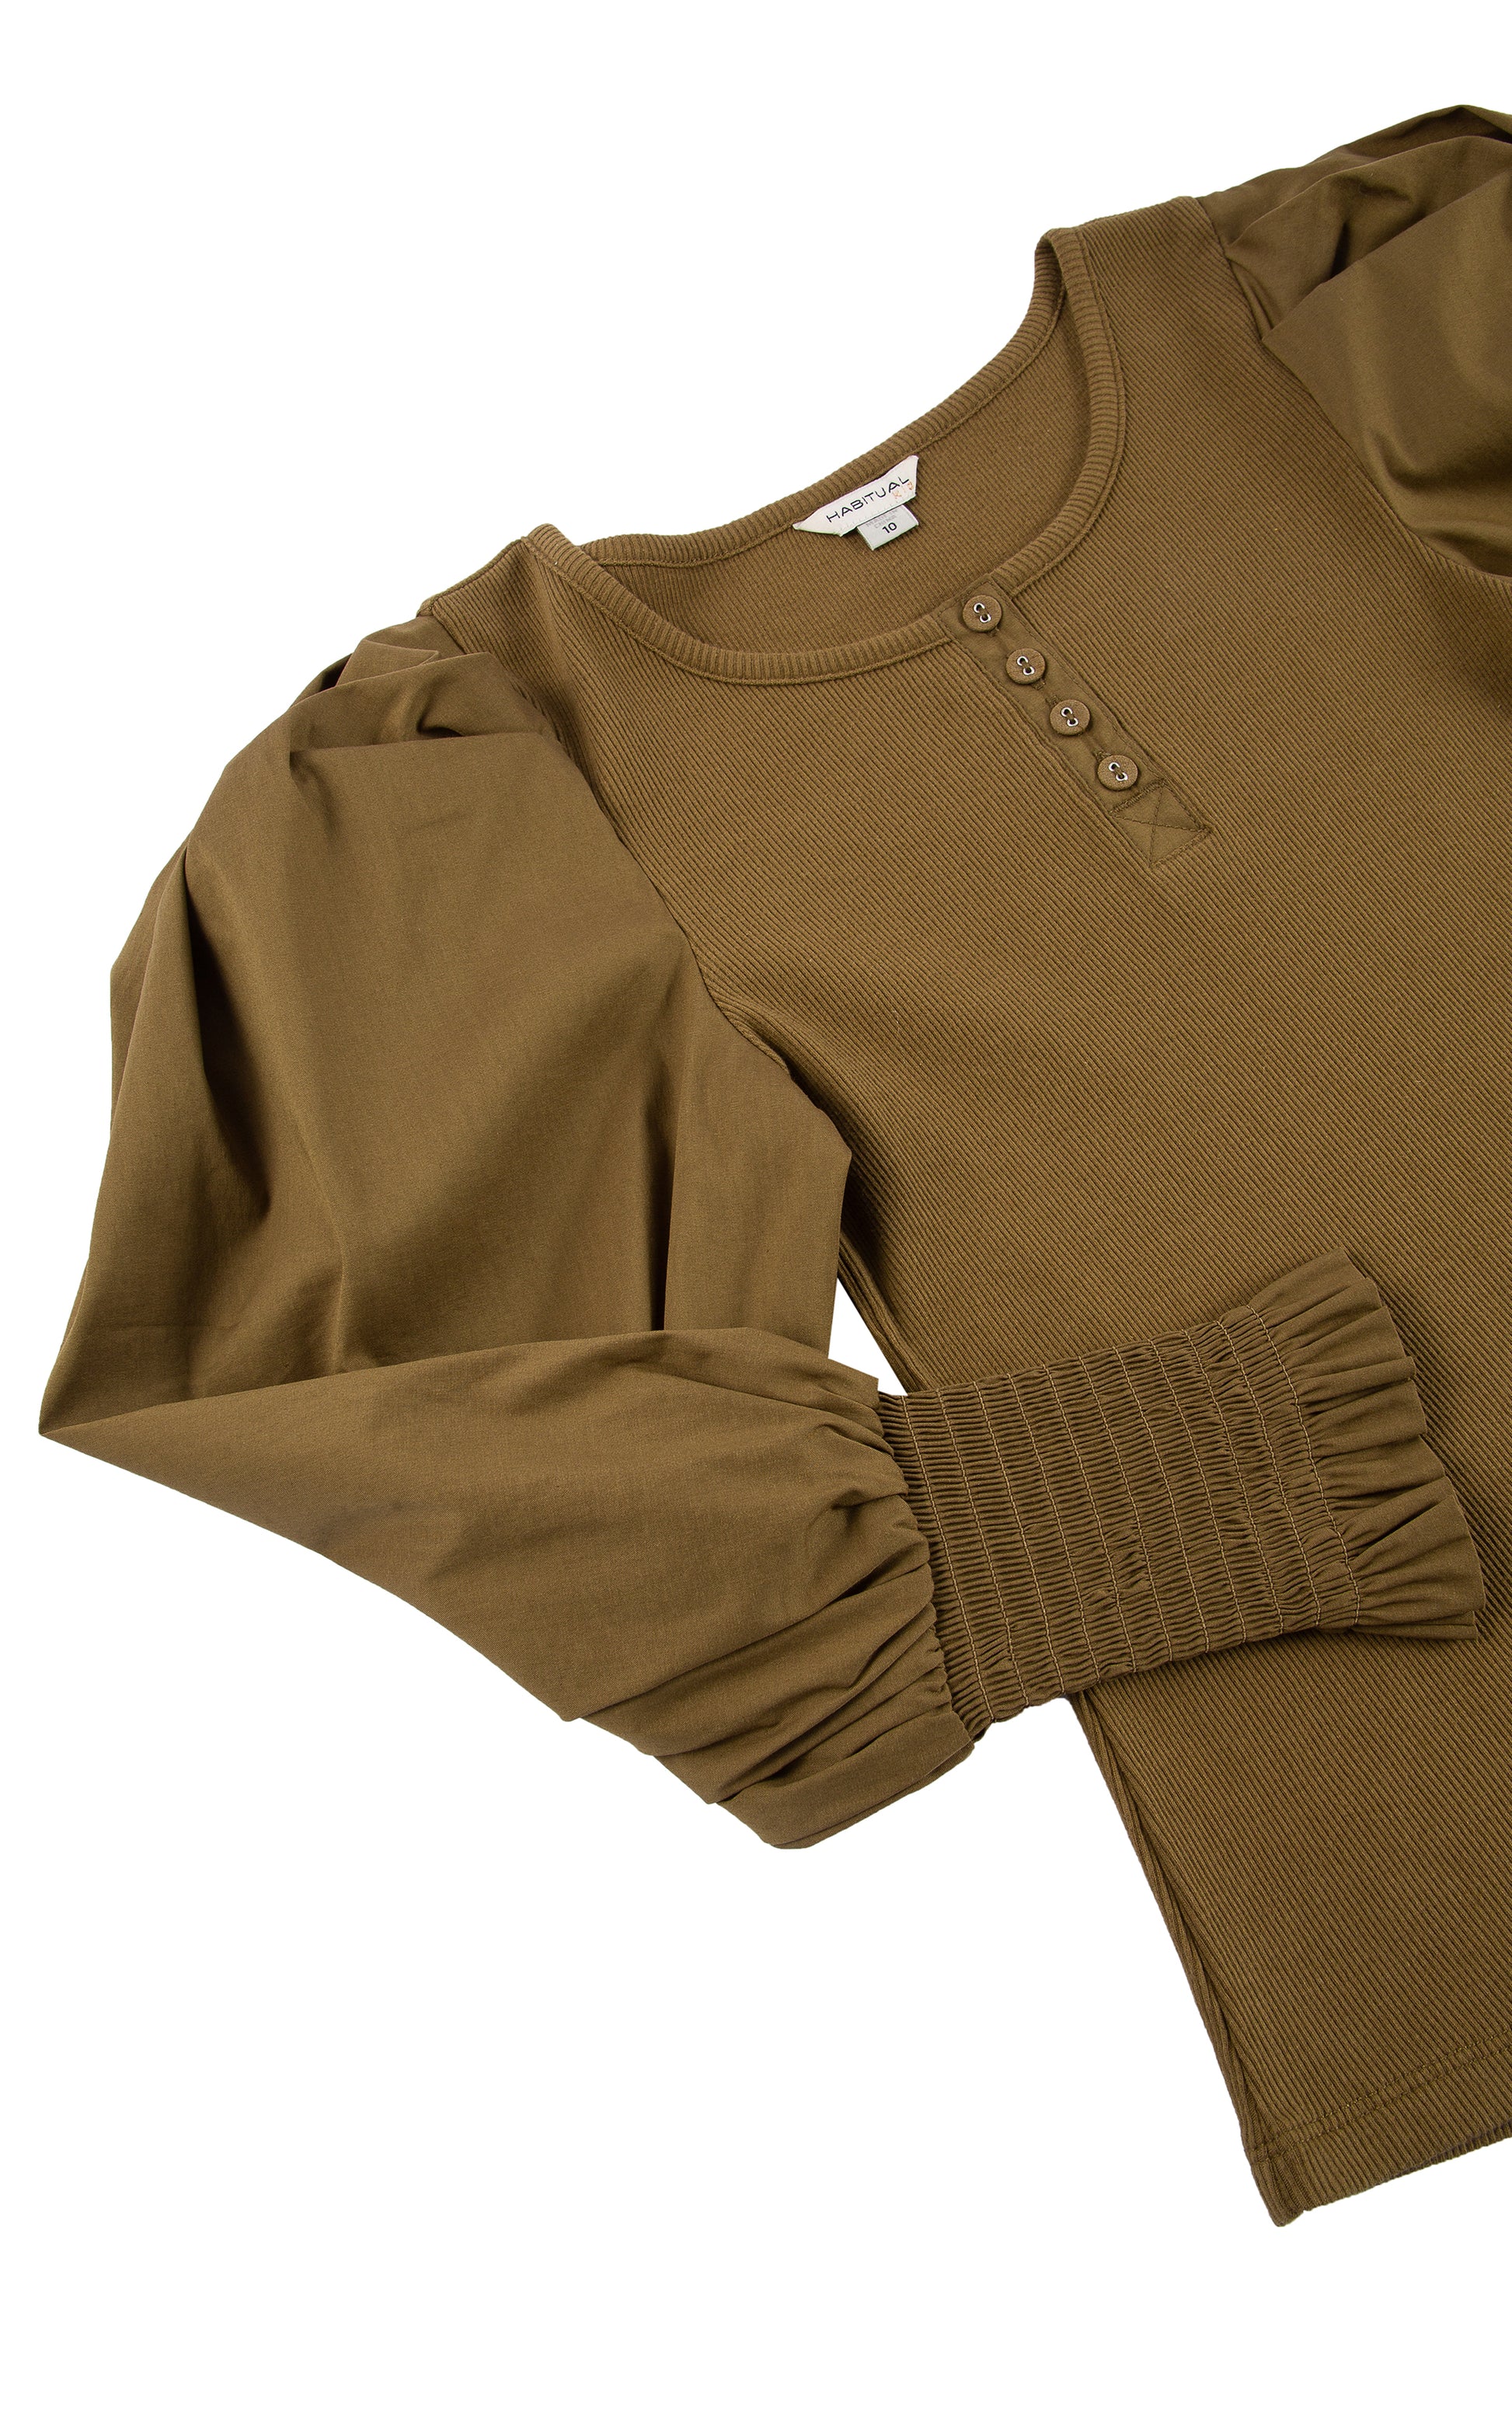 CLOSE UP OF BROWN LONG-SLEEVE TOP WITH FOUR BUTTONS AT THE COLLAR, PUFFY SLEEVES, AND SMOCKED CUFFS